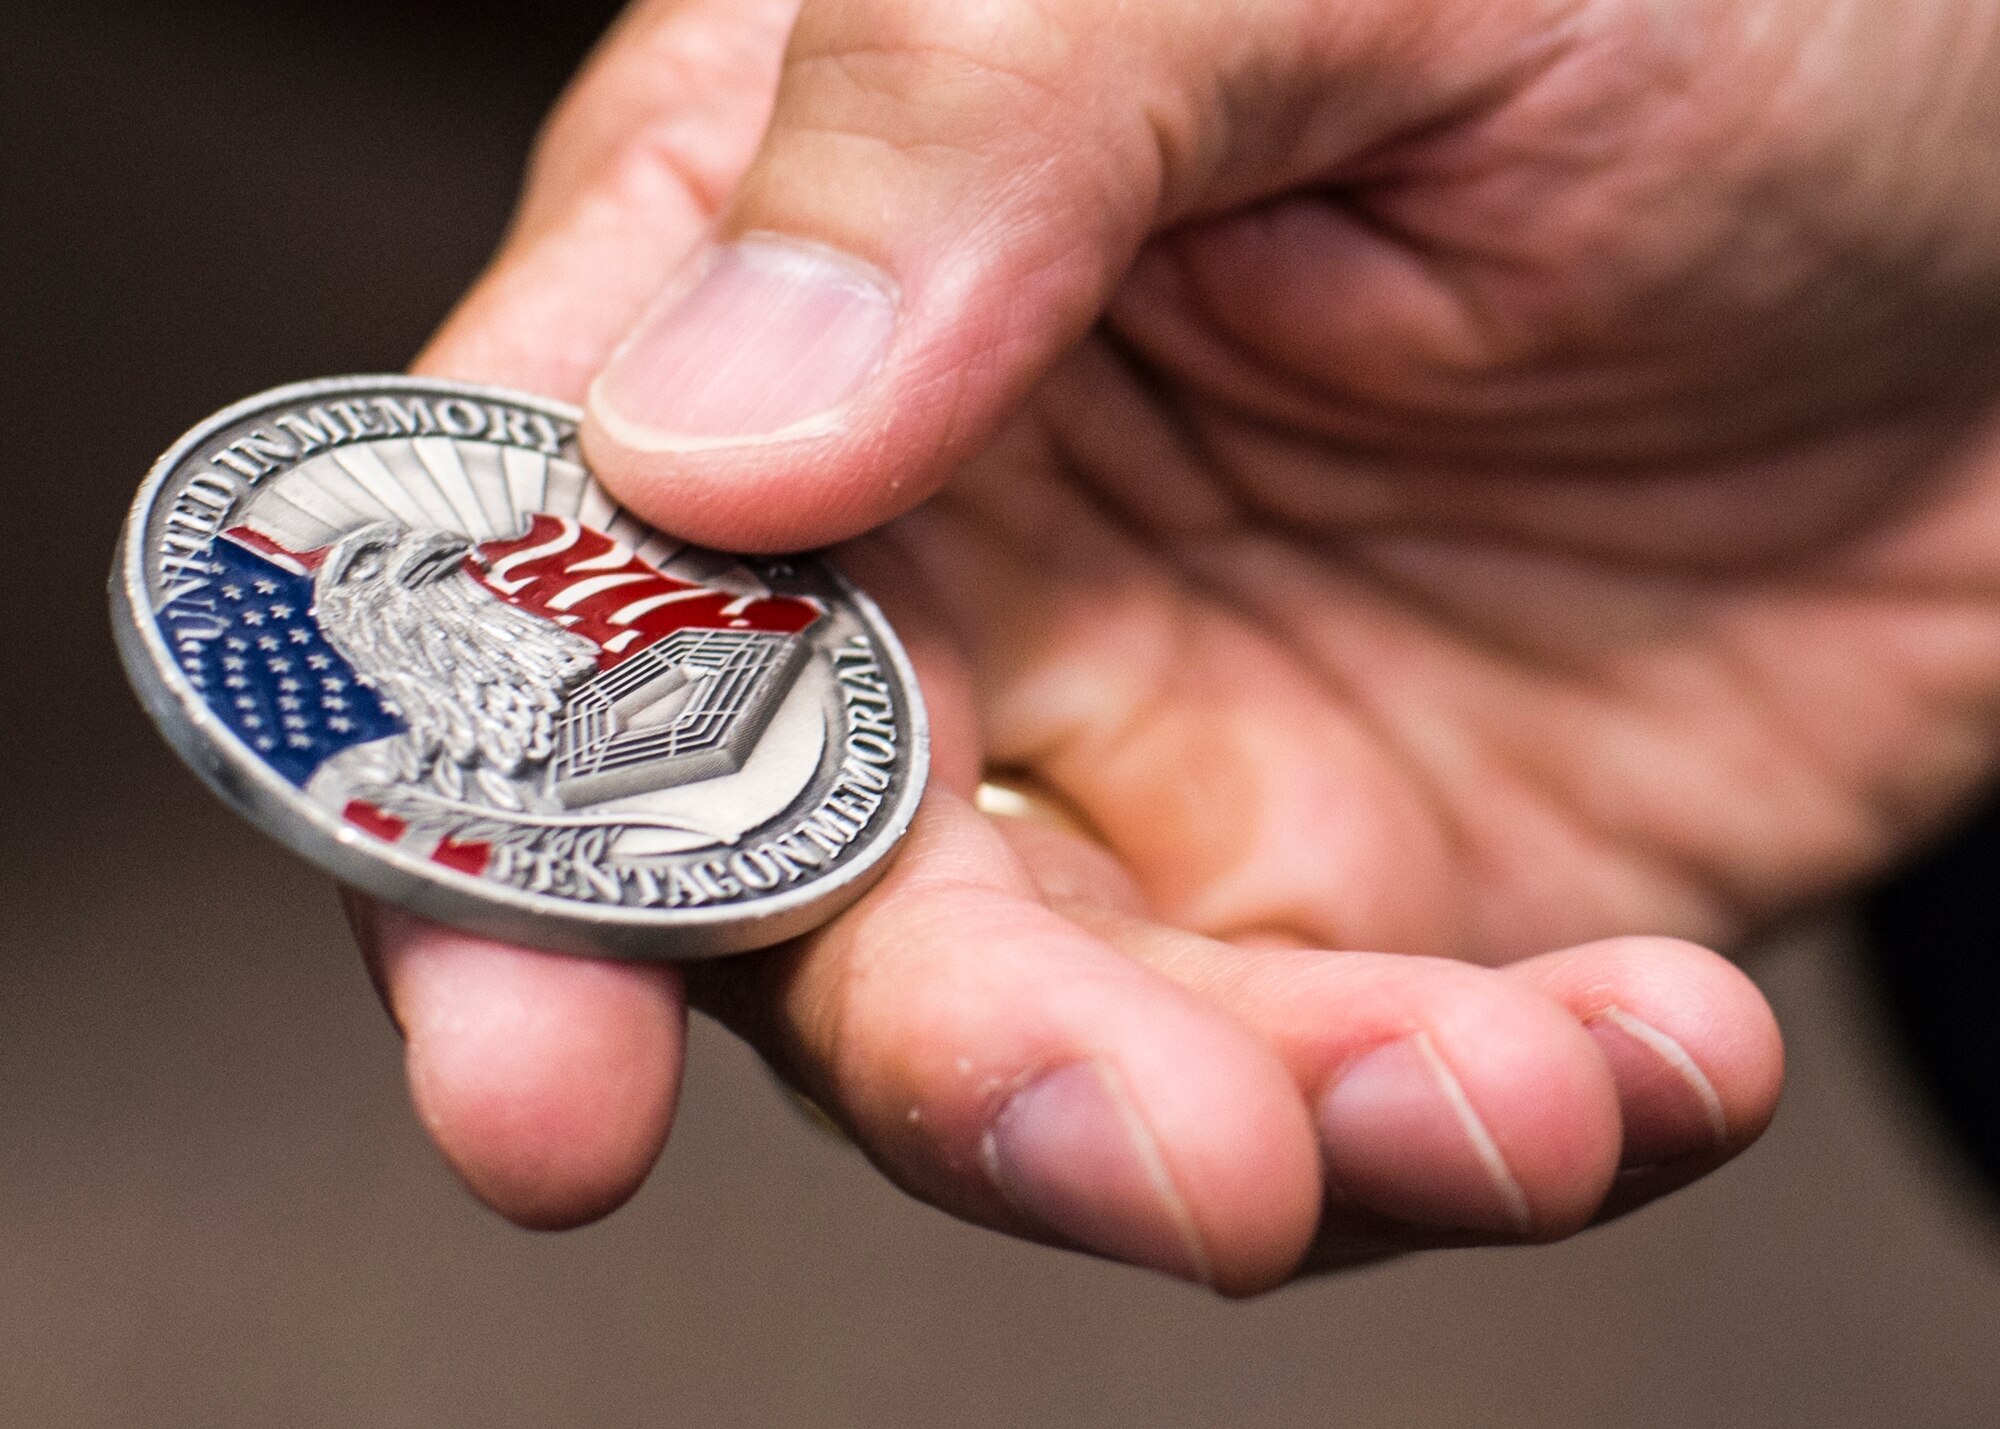 Col. Houston Cantwell, the 49th Wing commander, holds a 9/11 commemoration coin at Holloman Air Force Base, N.M., on Sept. 8, 2016. Cantwell was working as an Air Force intern at the Pentagon when the third hijacked airliner struck the west side, just a corner away from his office. (U.S. Air Force photo by Senior Airman Emily Kenney) 